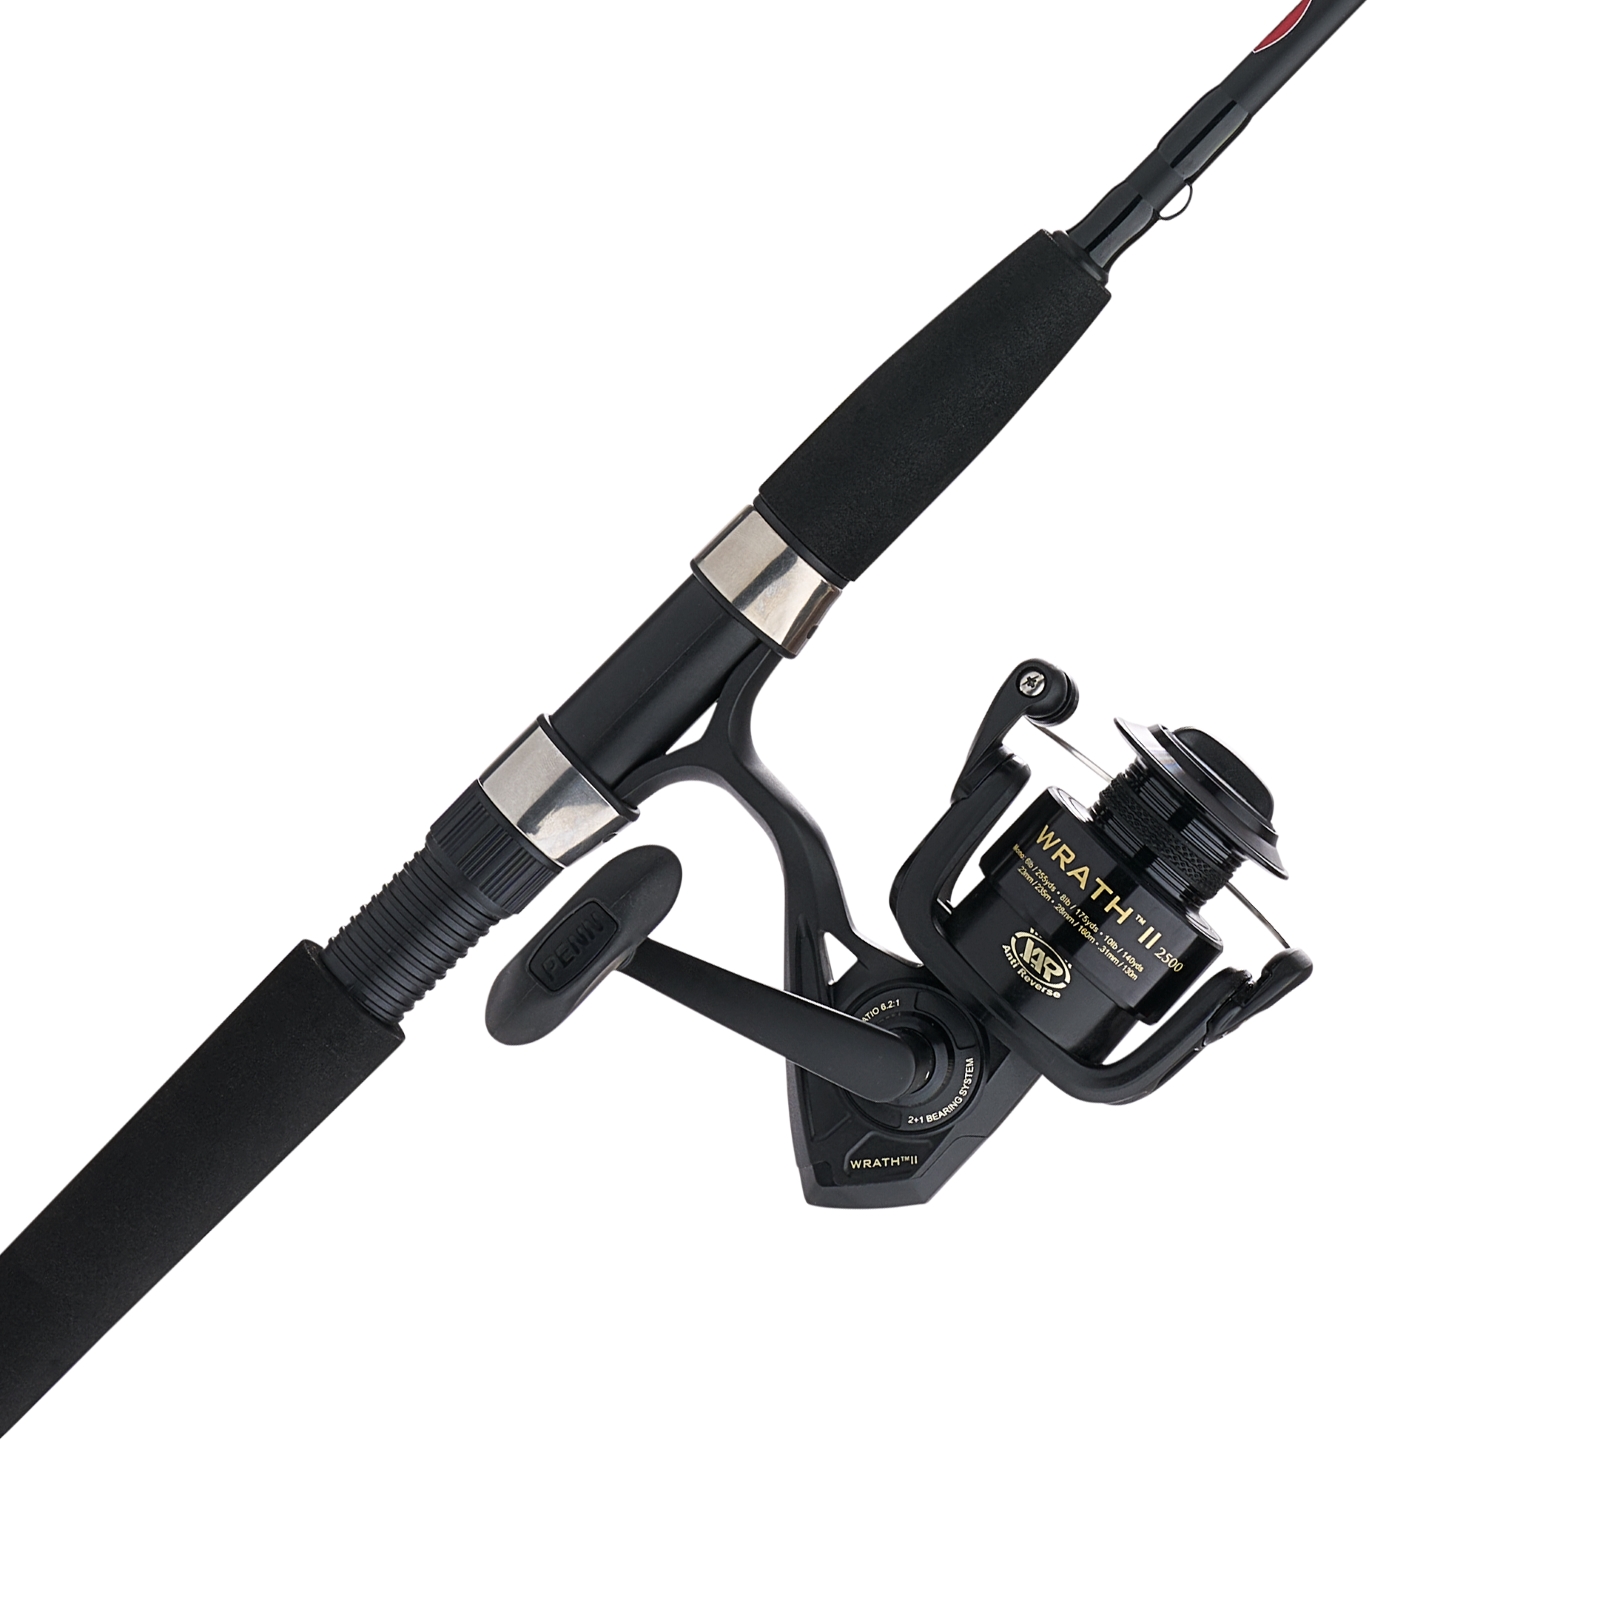 NEW PENN Wrath II Reel and Combo – Affordable Option